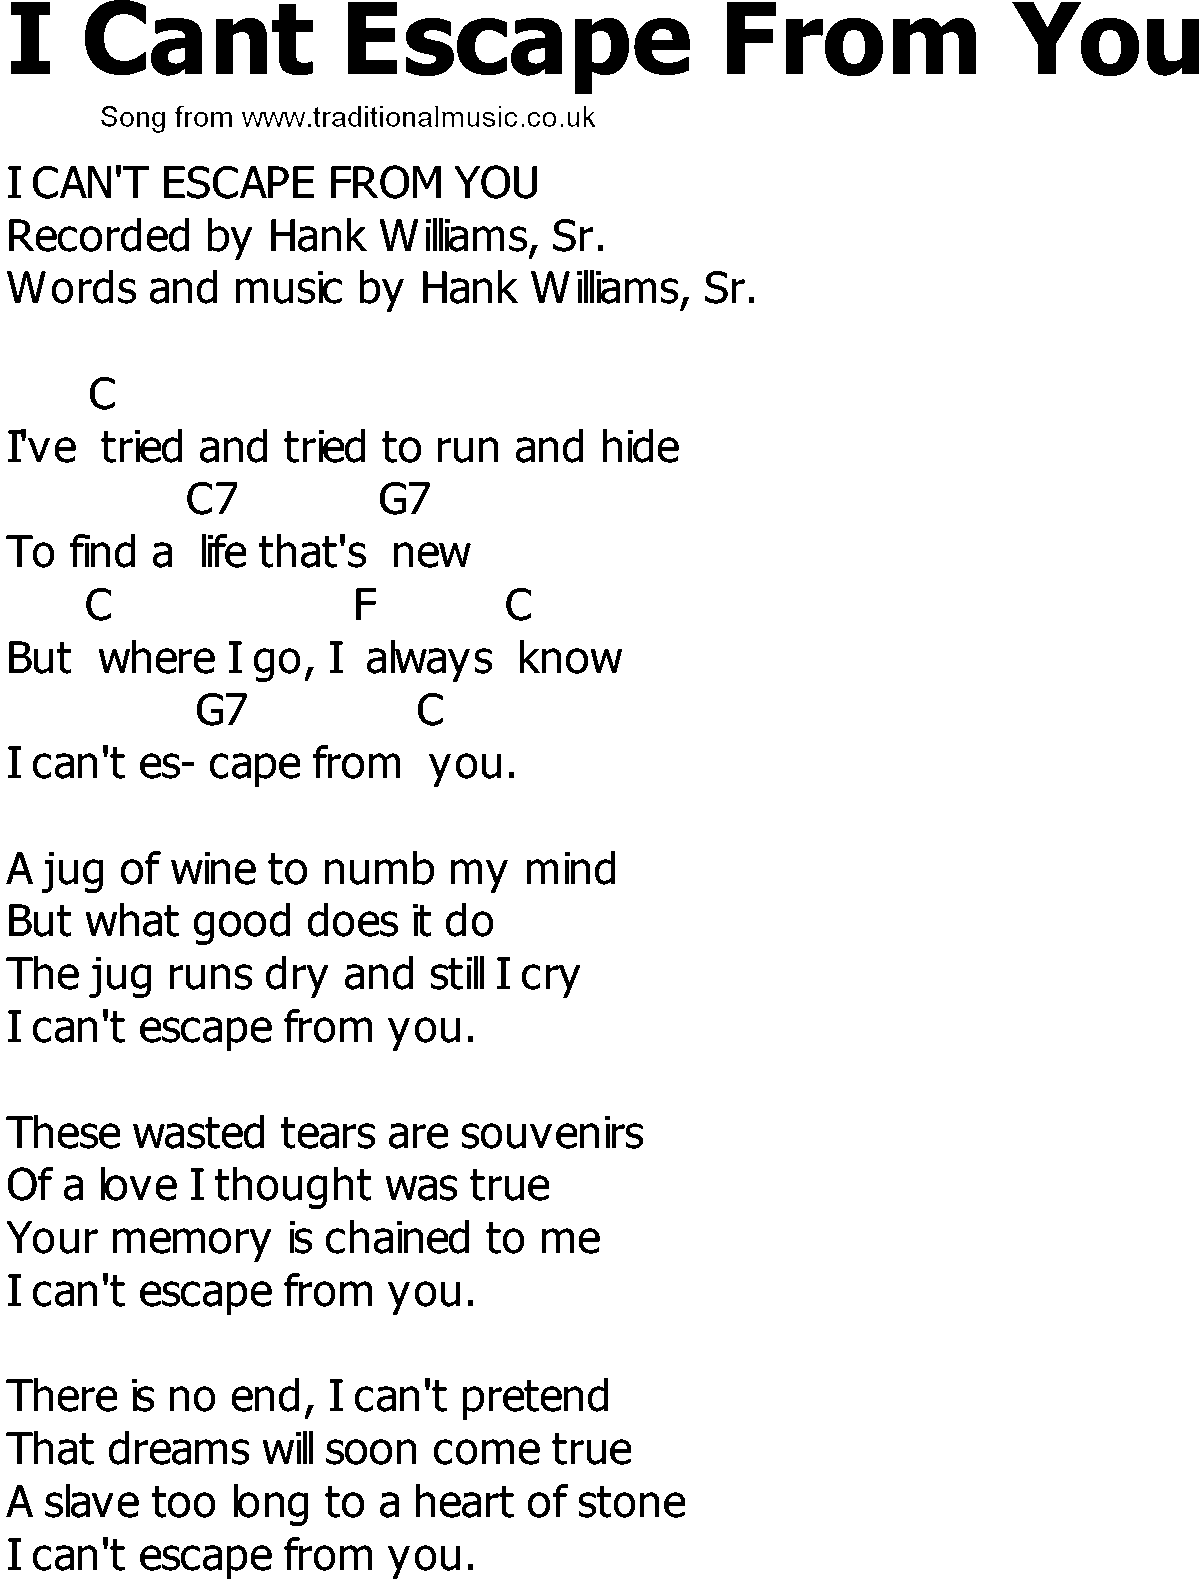 Old Country song lyrics with chords - I Cant Escape From You